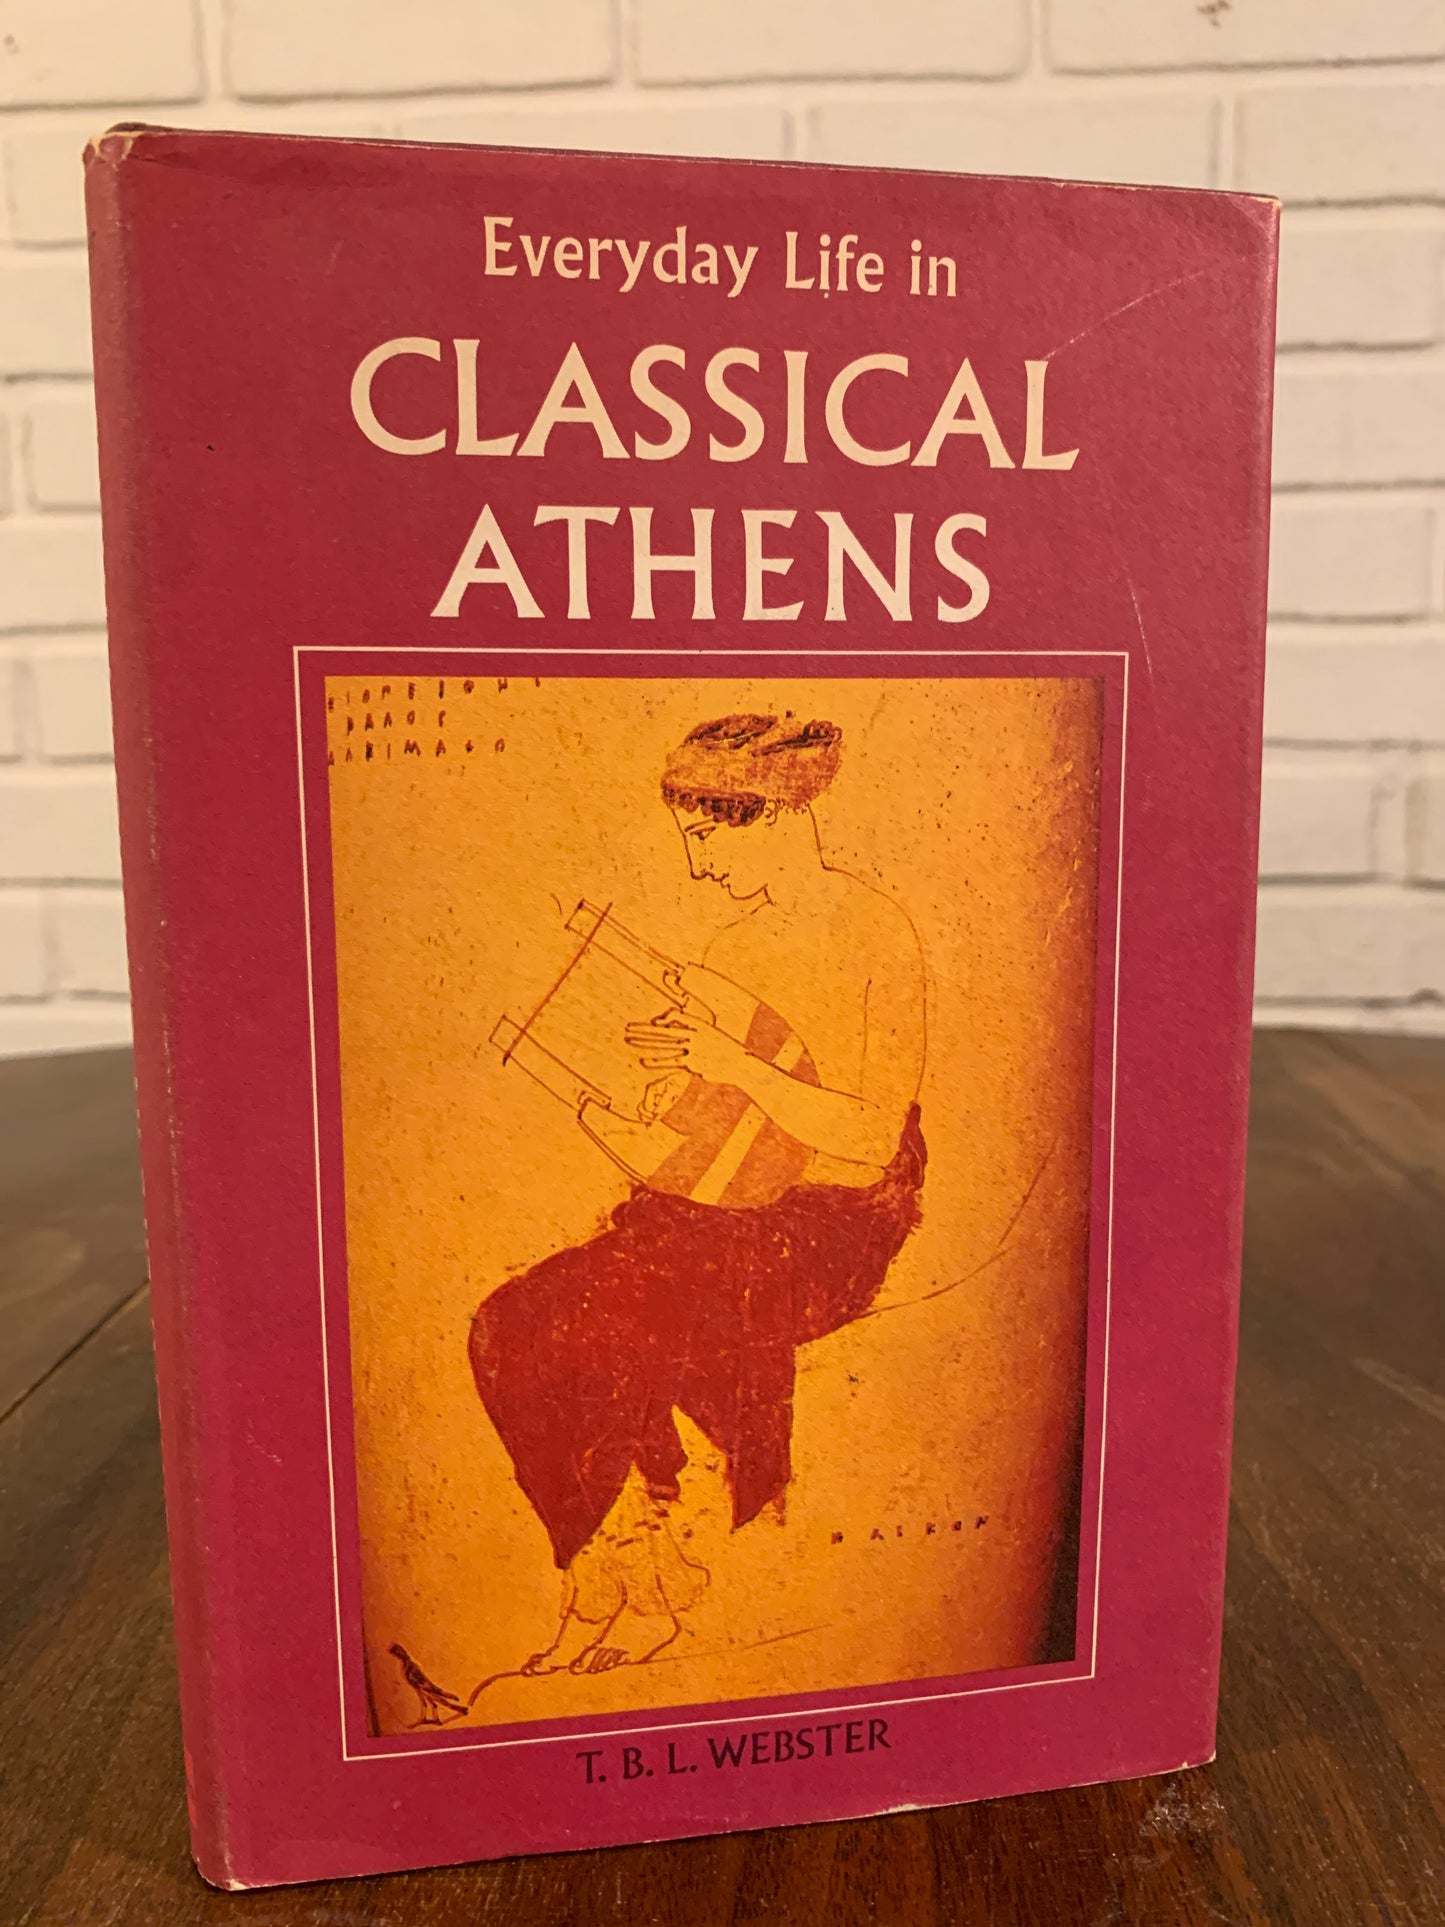 Everyday Life in Classical Athens by T.B.L. Webster 1969